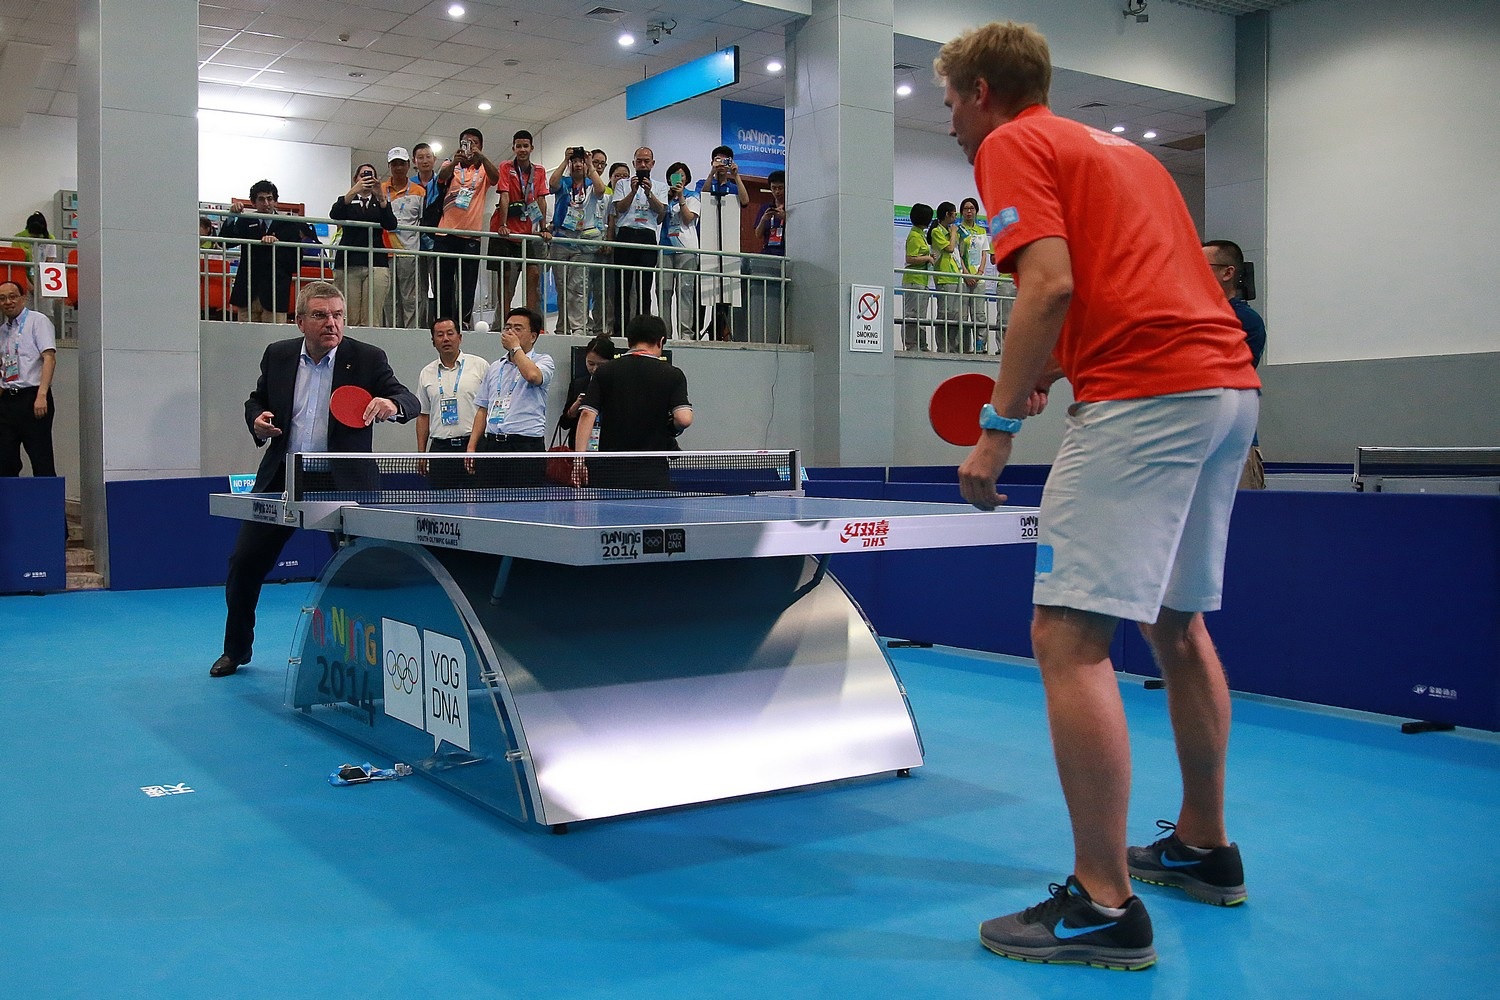 Thomas Bach practices some table tennis with Swedish great Jorgen Persson ©ITTF